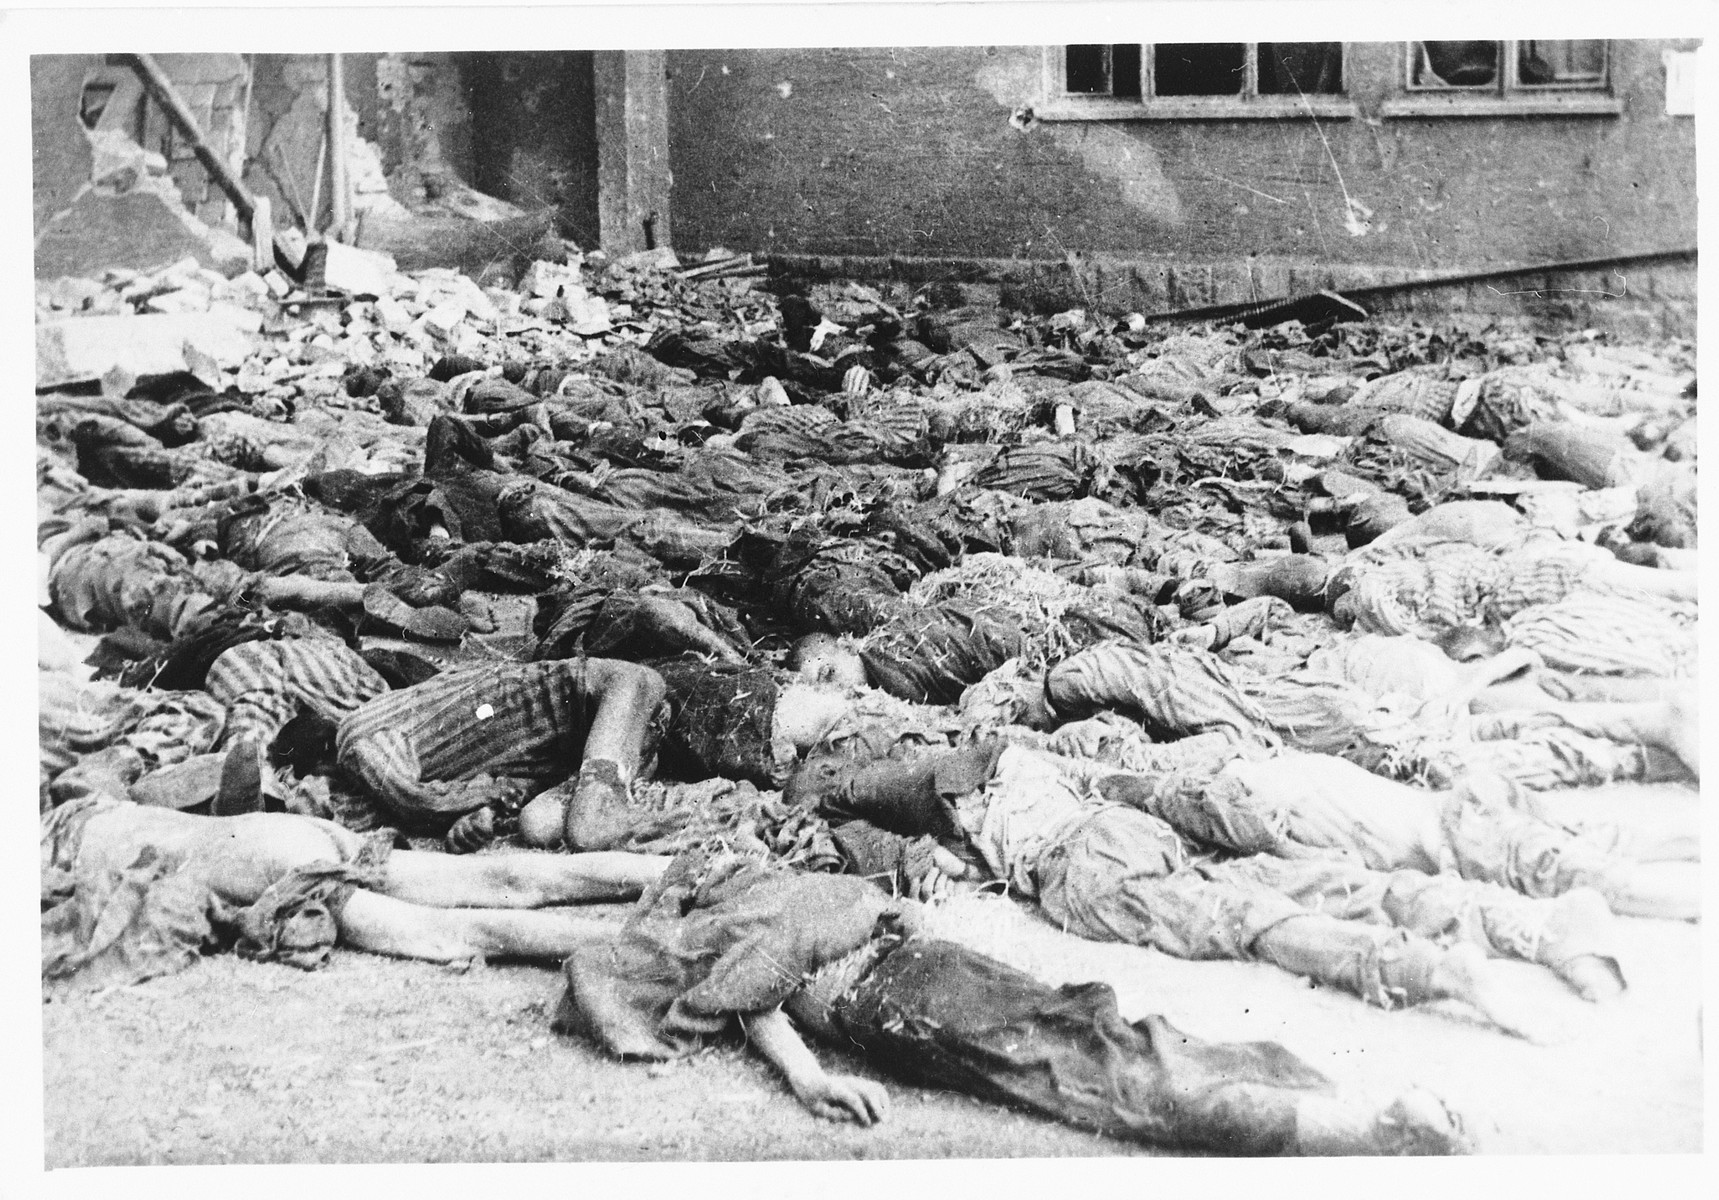 View of corpses lying on the ground of the Nordhausen concentration camp following liberation.